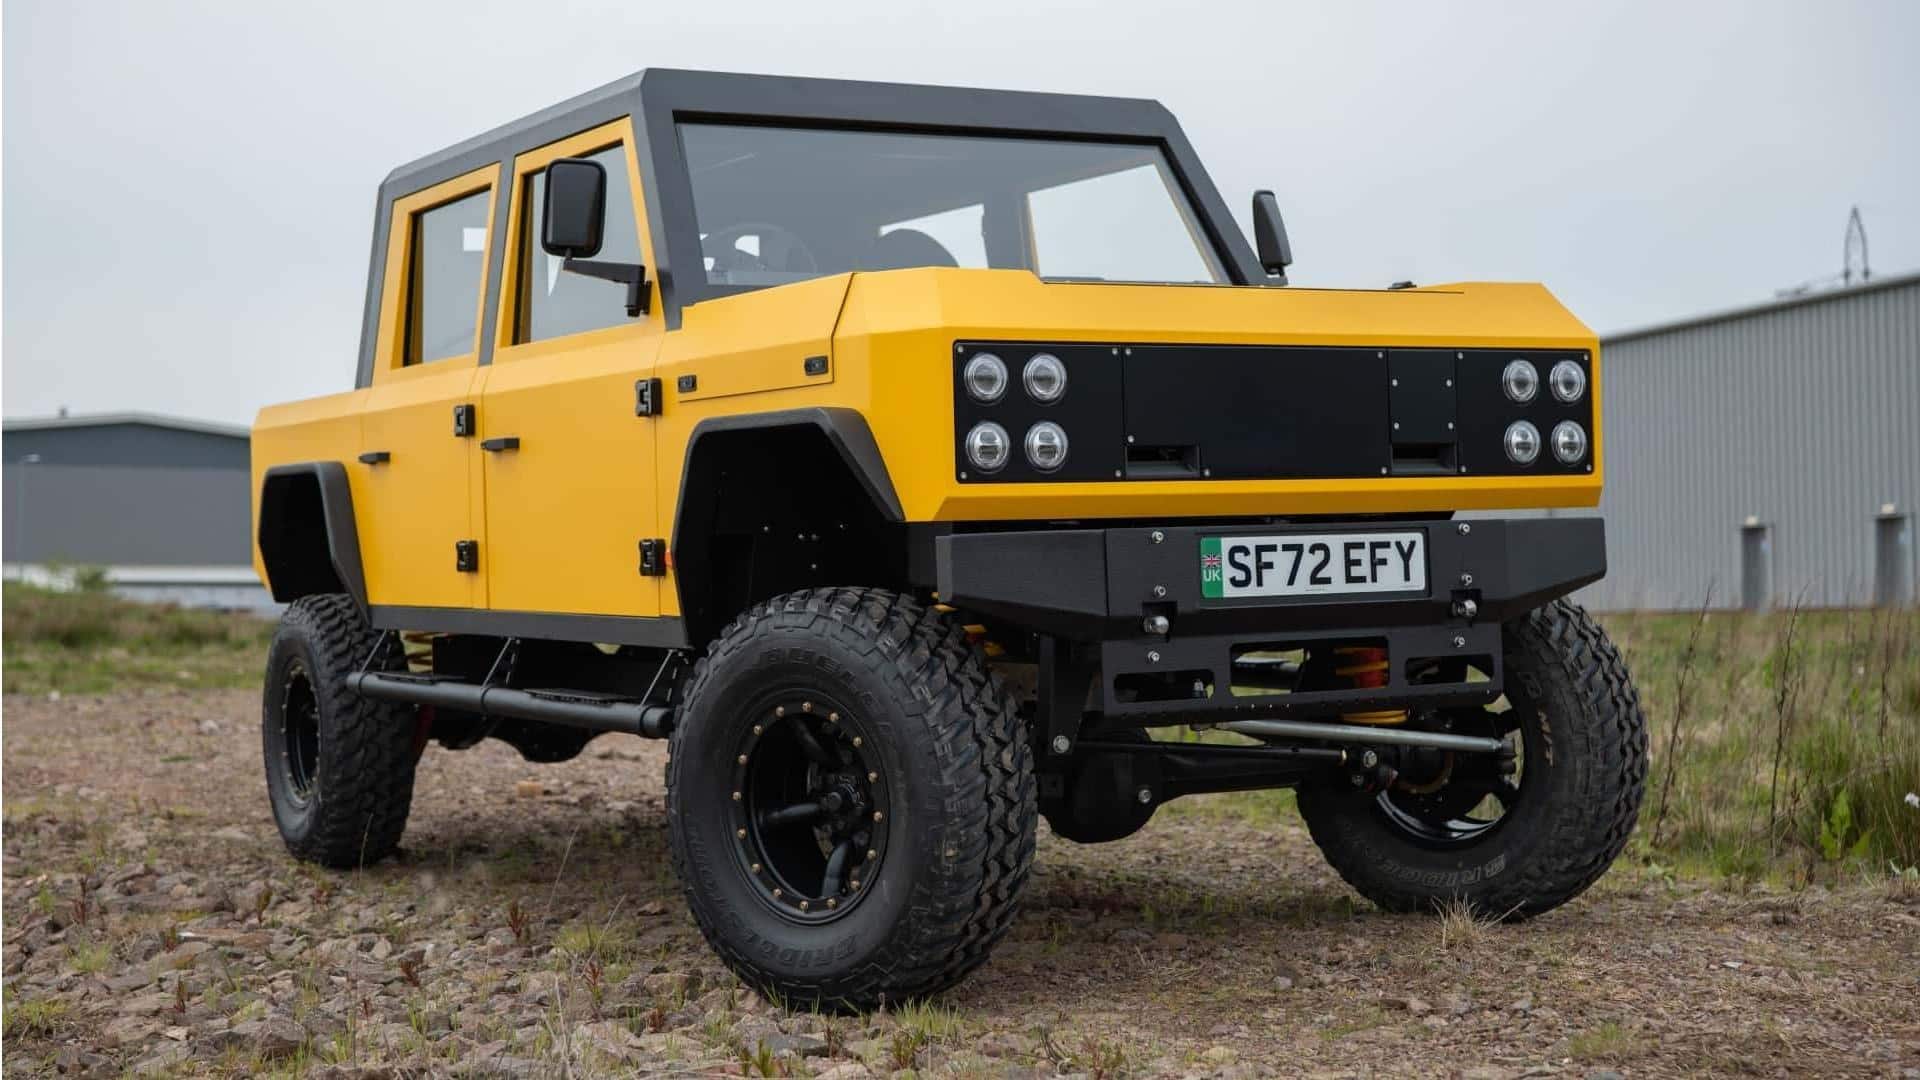 Munro MK_1 EV's pickup version breaks cover: Check top features